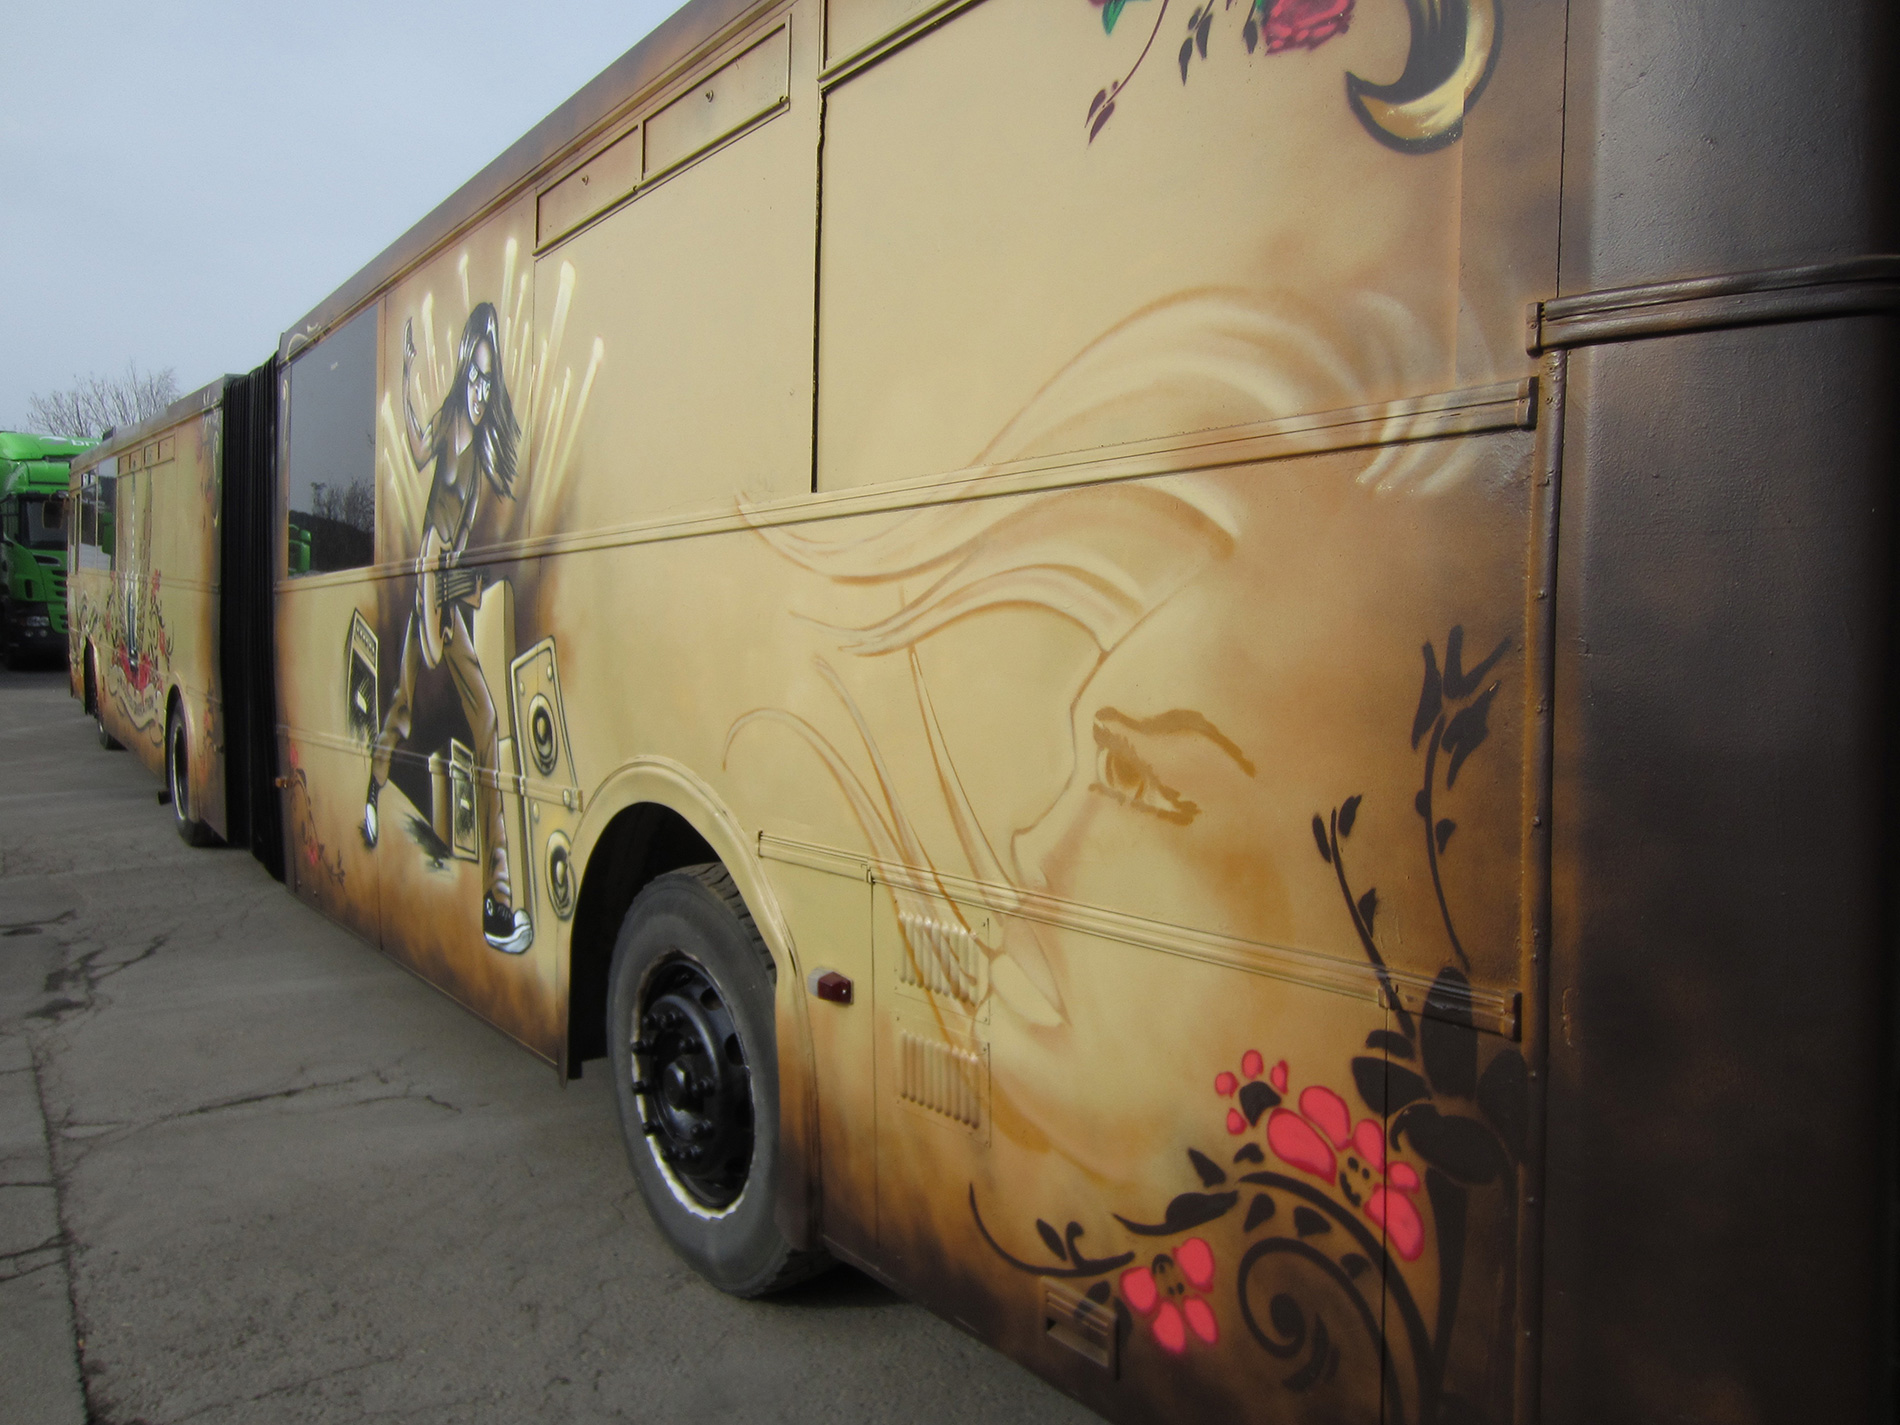 Wasted Generation rustic bus exterior designed graffiti style